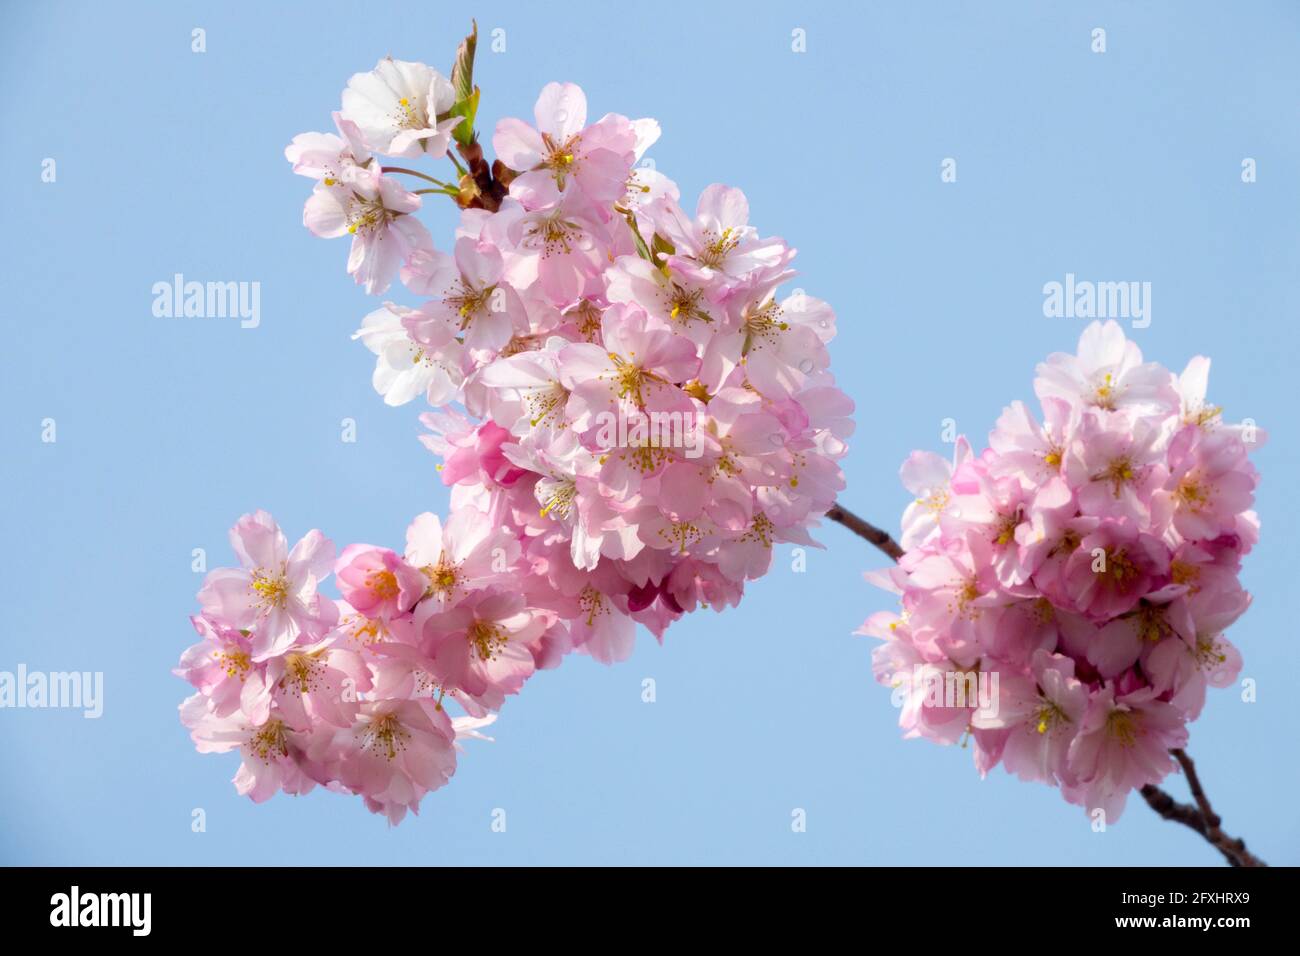 Pink cherry blossoms in full bloom against blue sky Stock Photo